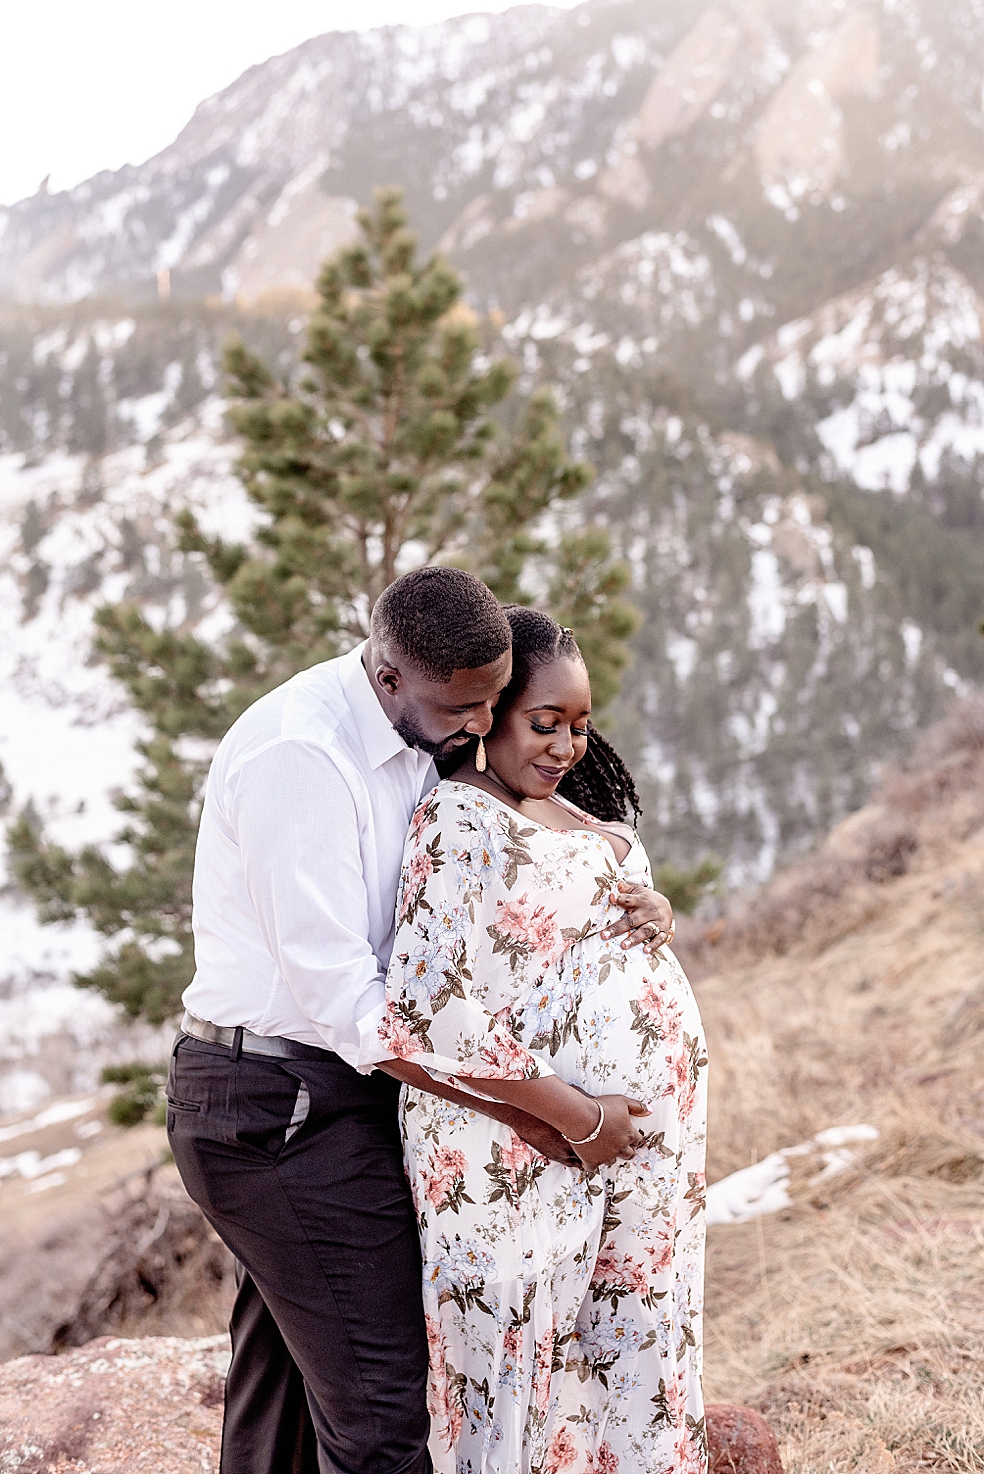 Mom and dad to be snuggling together near the mountains | Photo by Huntsville Motherhood Photographer Jessica Lee Photography